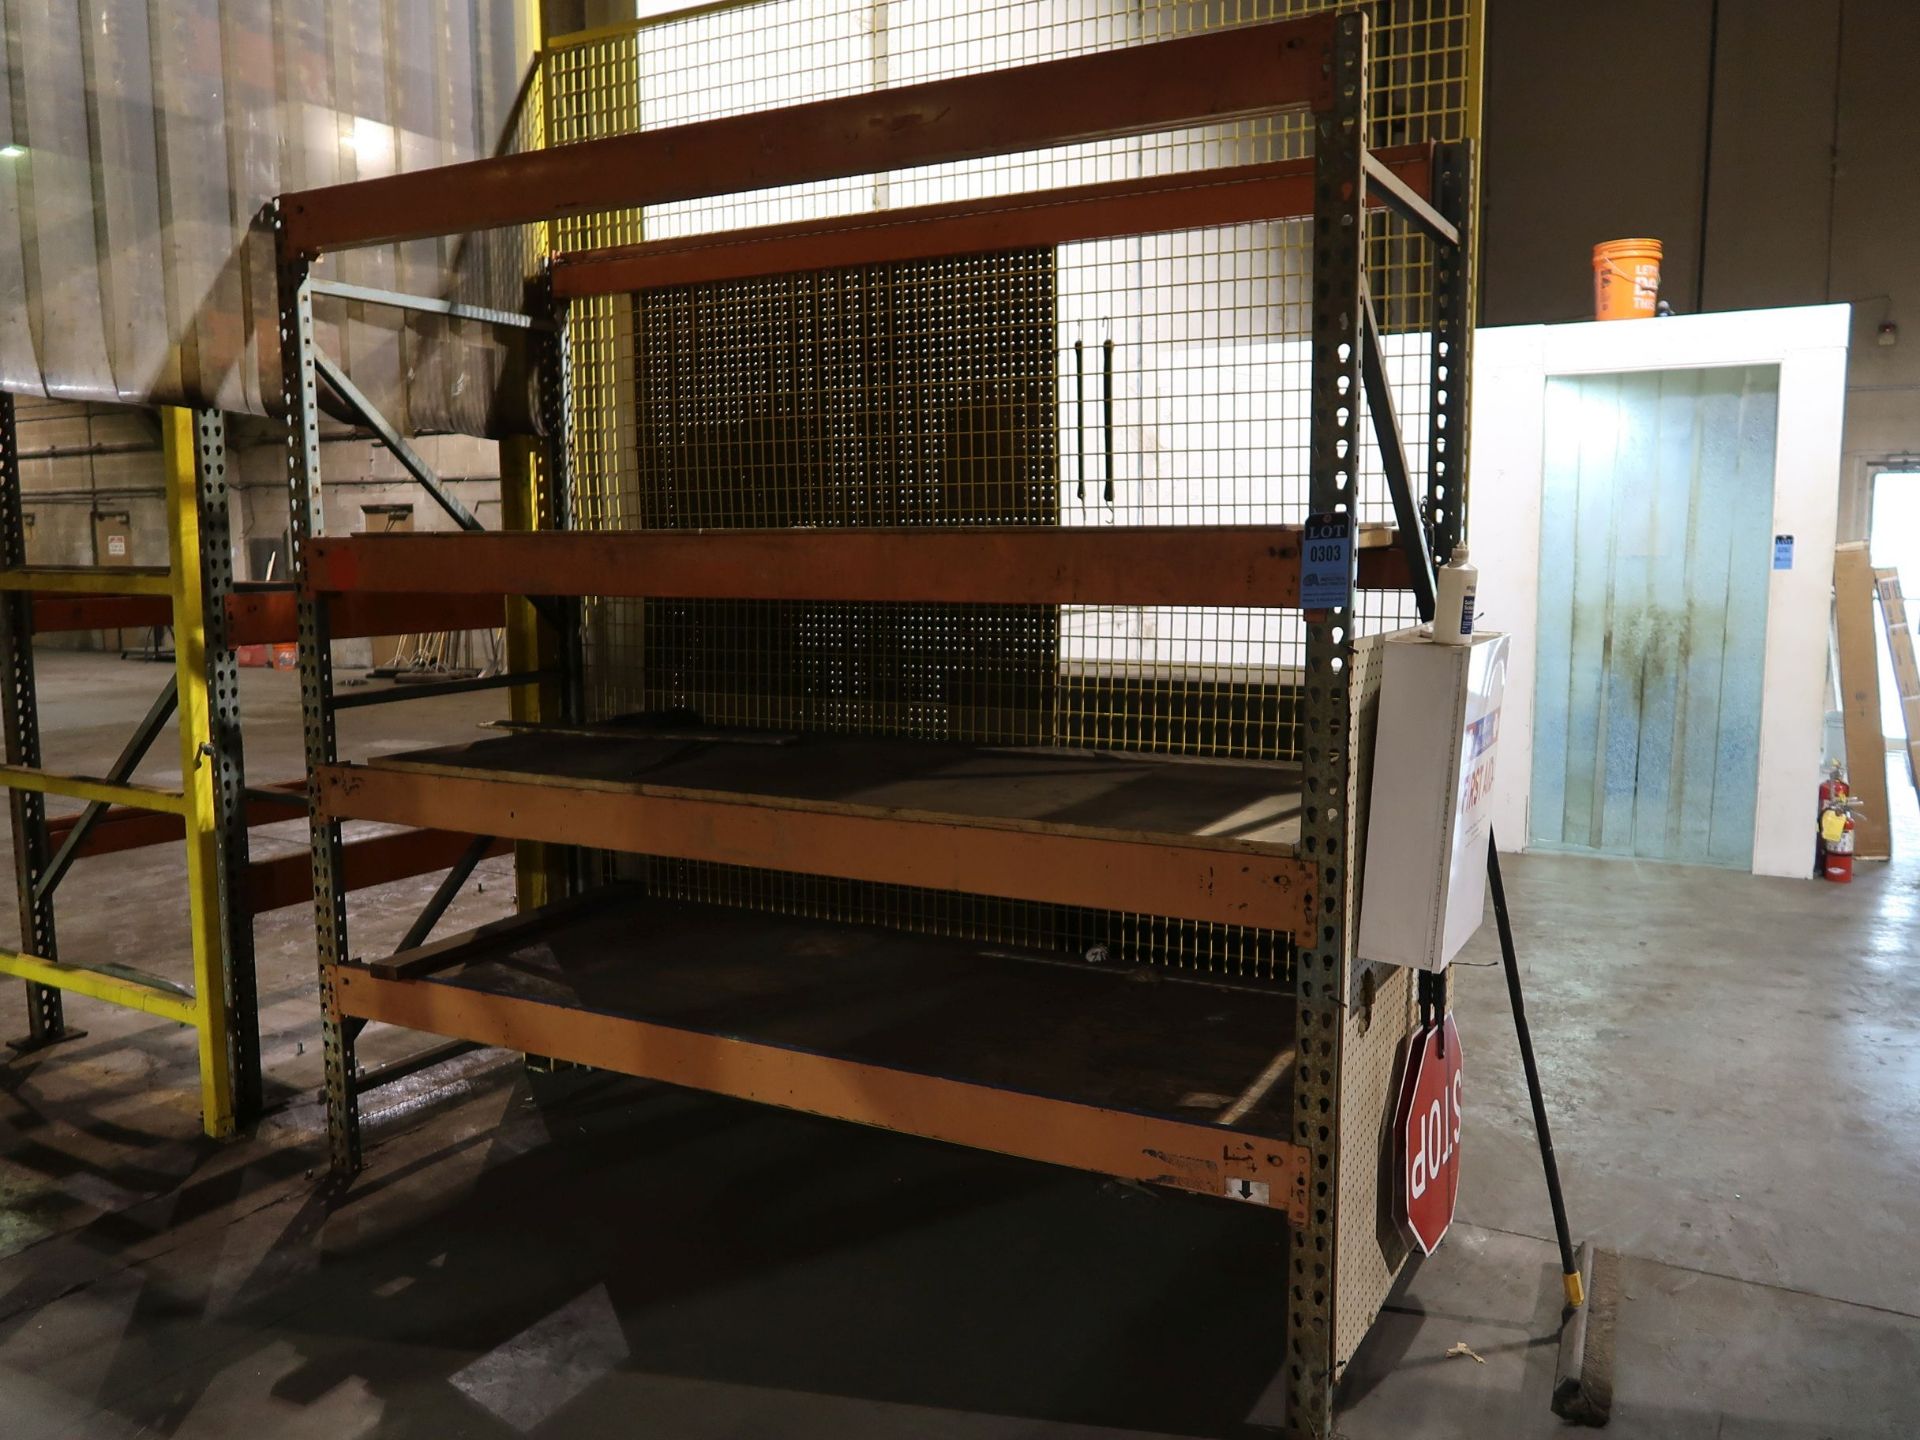 SECTIONS 36" X 96" X 96" HIGH ADJUSTABLE BEAM PALLET RACK, (8) BEAMS PER SECTION AND WELDED WIRE